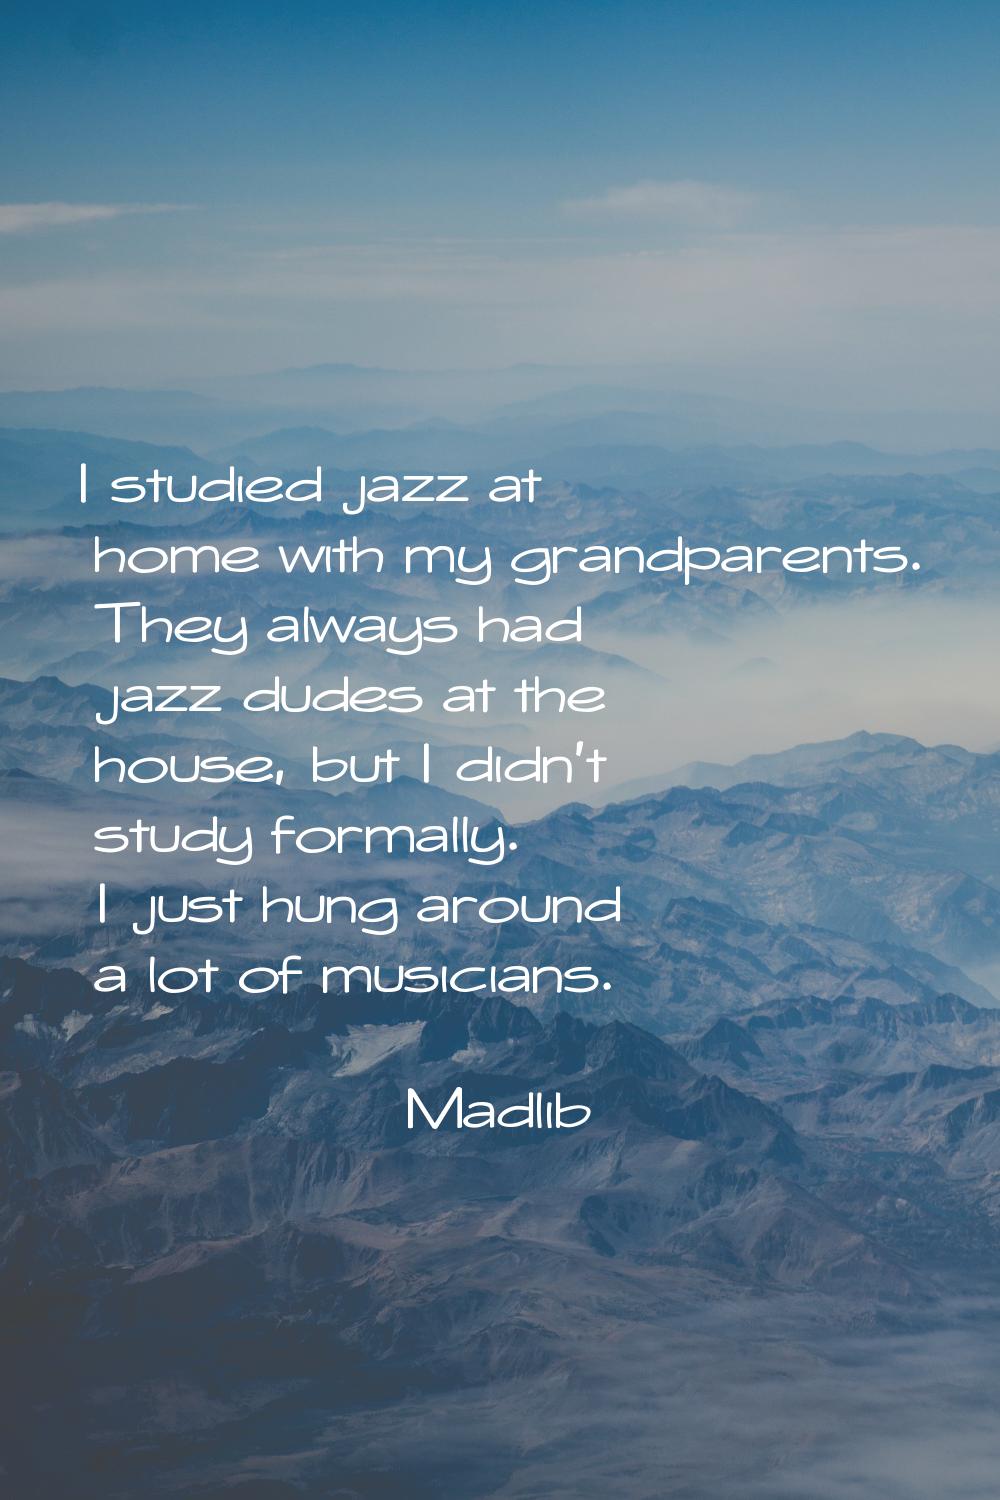 I studied jazz at home with my grandparents. They always had jazz dudes at the house, but I didn't 